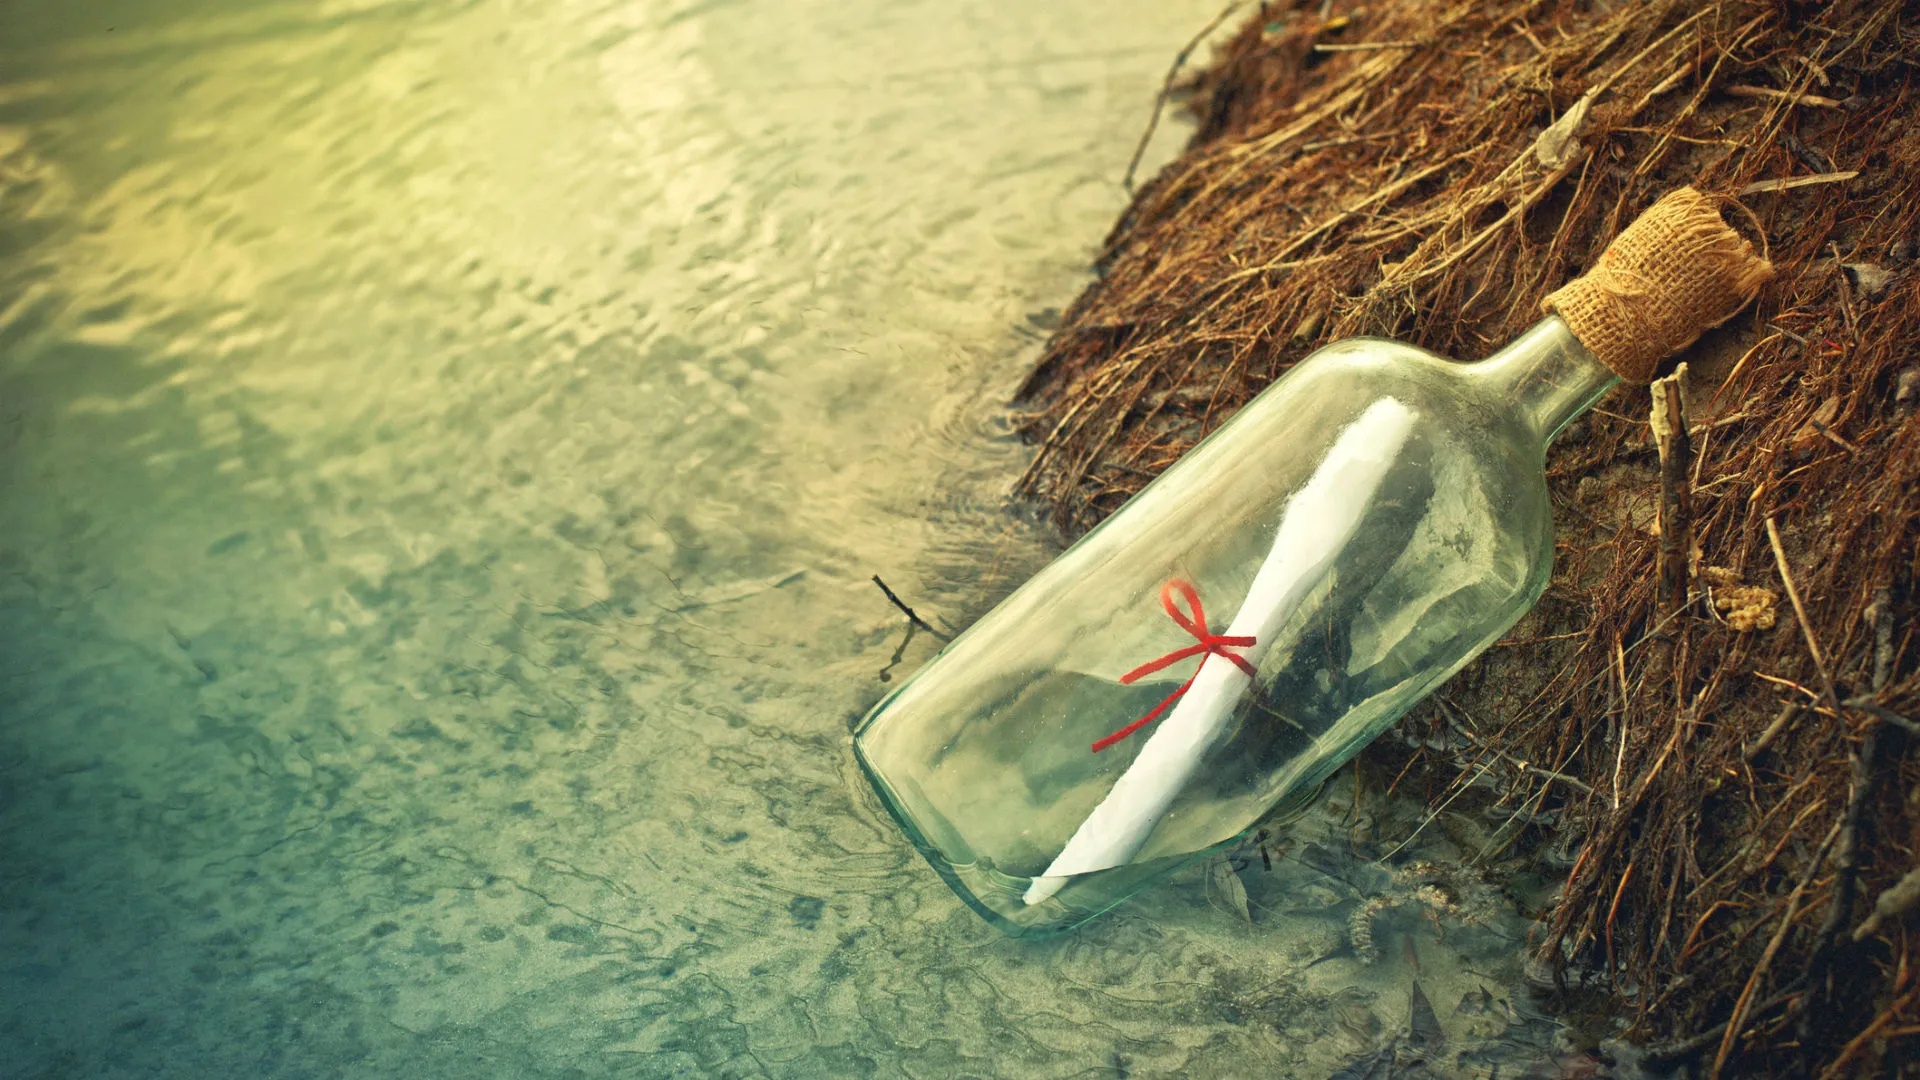 Message in a Bottle: Represents the belief that even when things seem hopeless, there is always the possibility of connection. 1920x1080 Full HD Wallpaper.